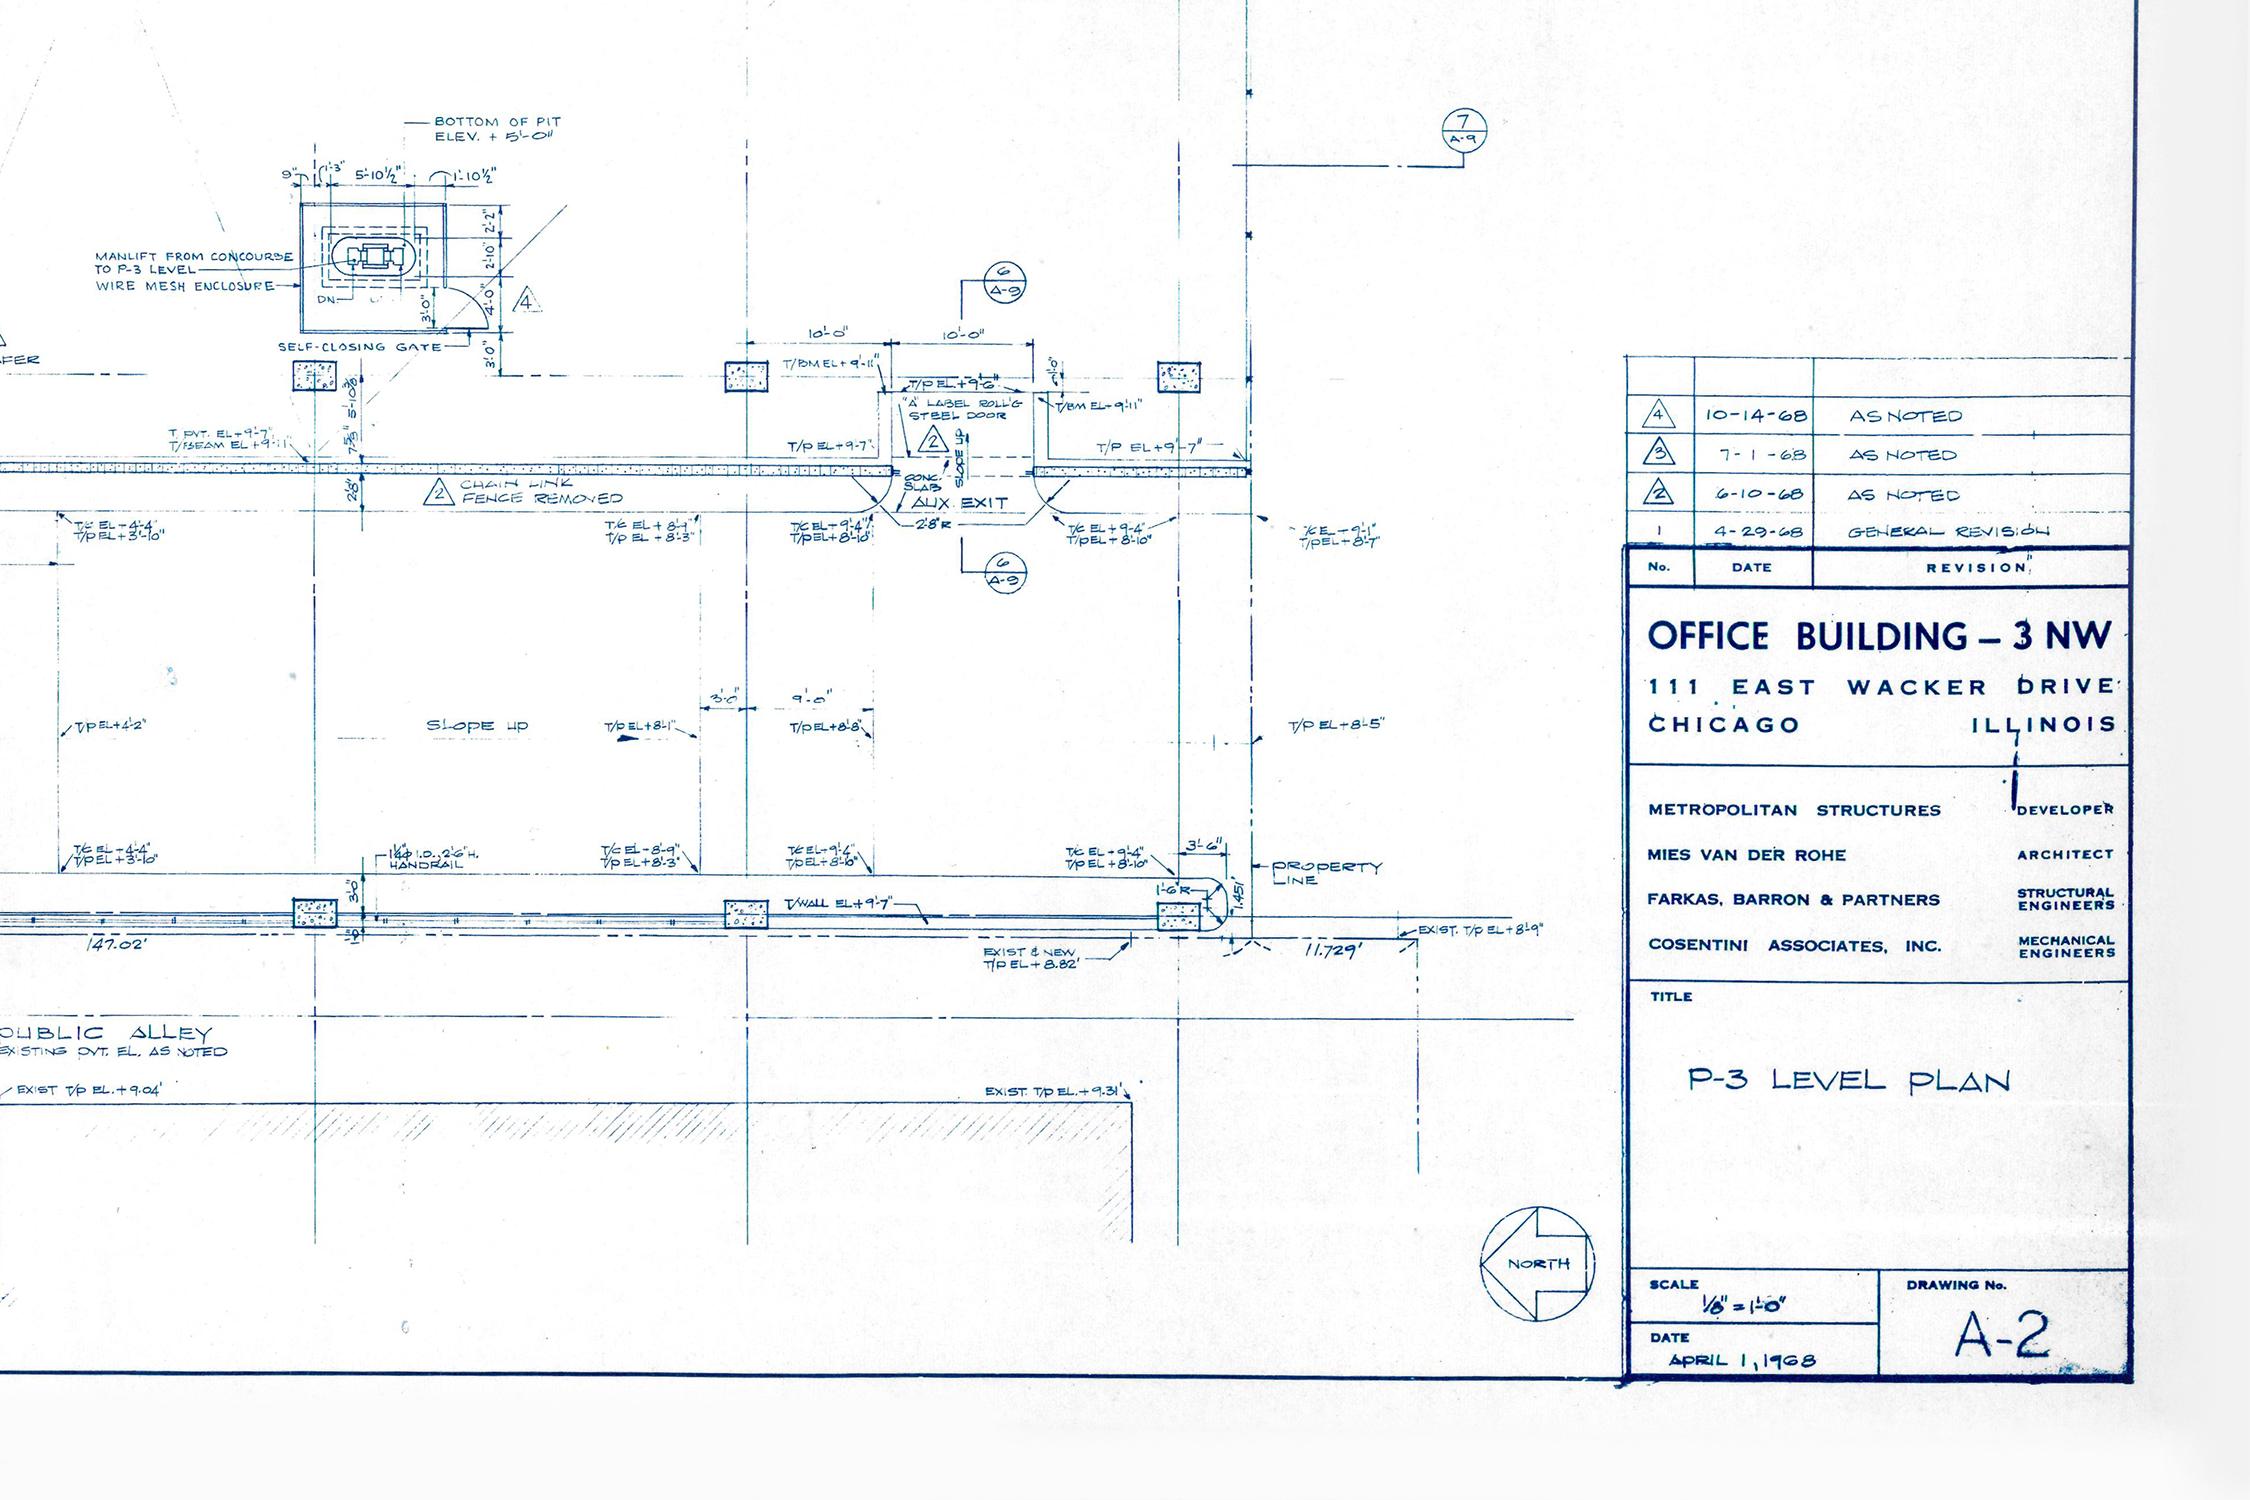 blueprint from the office of Ludwig Mies van der Rohe, Chicago 1968

One Illinois Center Office Building - 3 NW, 111 East Wacker Drive, Chicago, IL

Drawing A-2: P-3 Level Plan

Ludwig Mies van der Rohe

This is one of a collection of prints